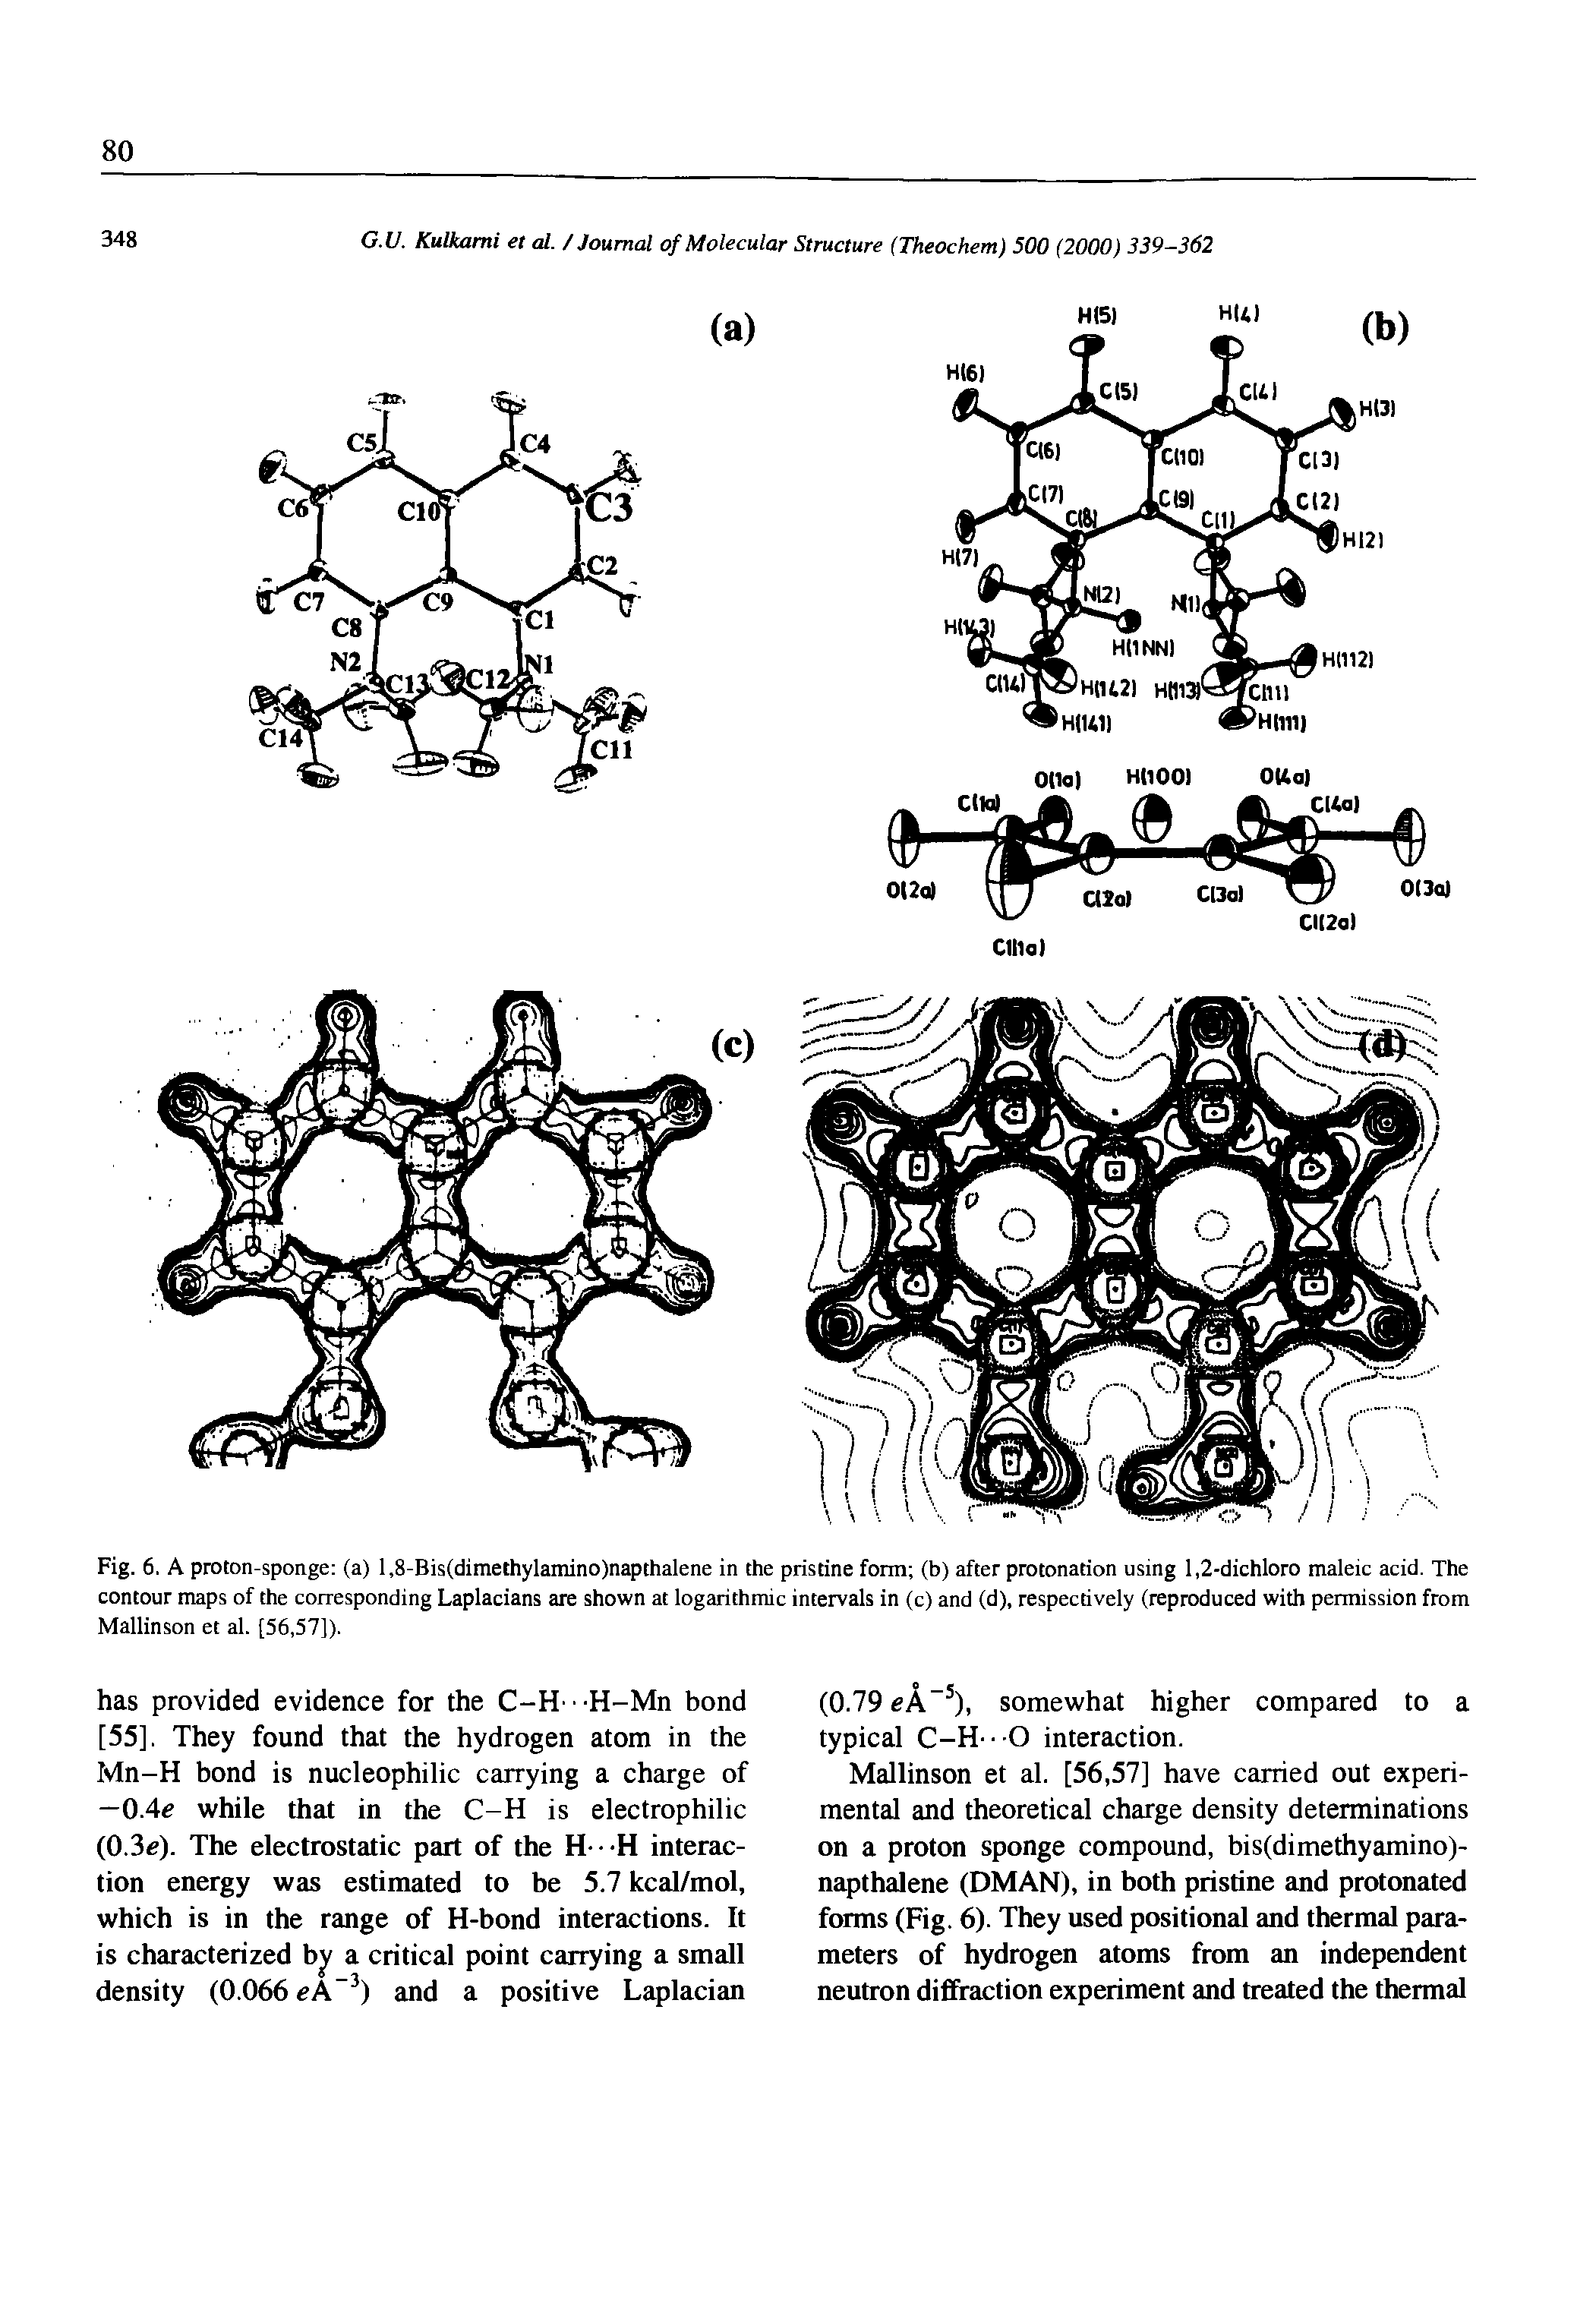 Fig. 6. A proton-sponge (a) l,8-Bis(dimethylamino)napthalene in the pristine form (b) after protonation using 1,2-dichloro maleic acid. The contour maps of the corresponding Laplacians are shown at logarithmic intervals in (c) and (d), respectively (reproduced with permission from Mallinson et al. [56,57]).